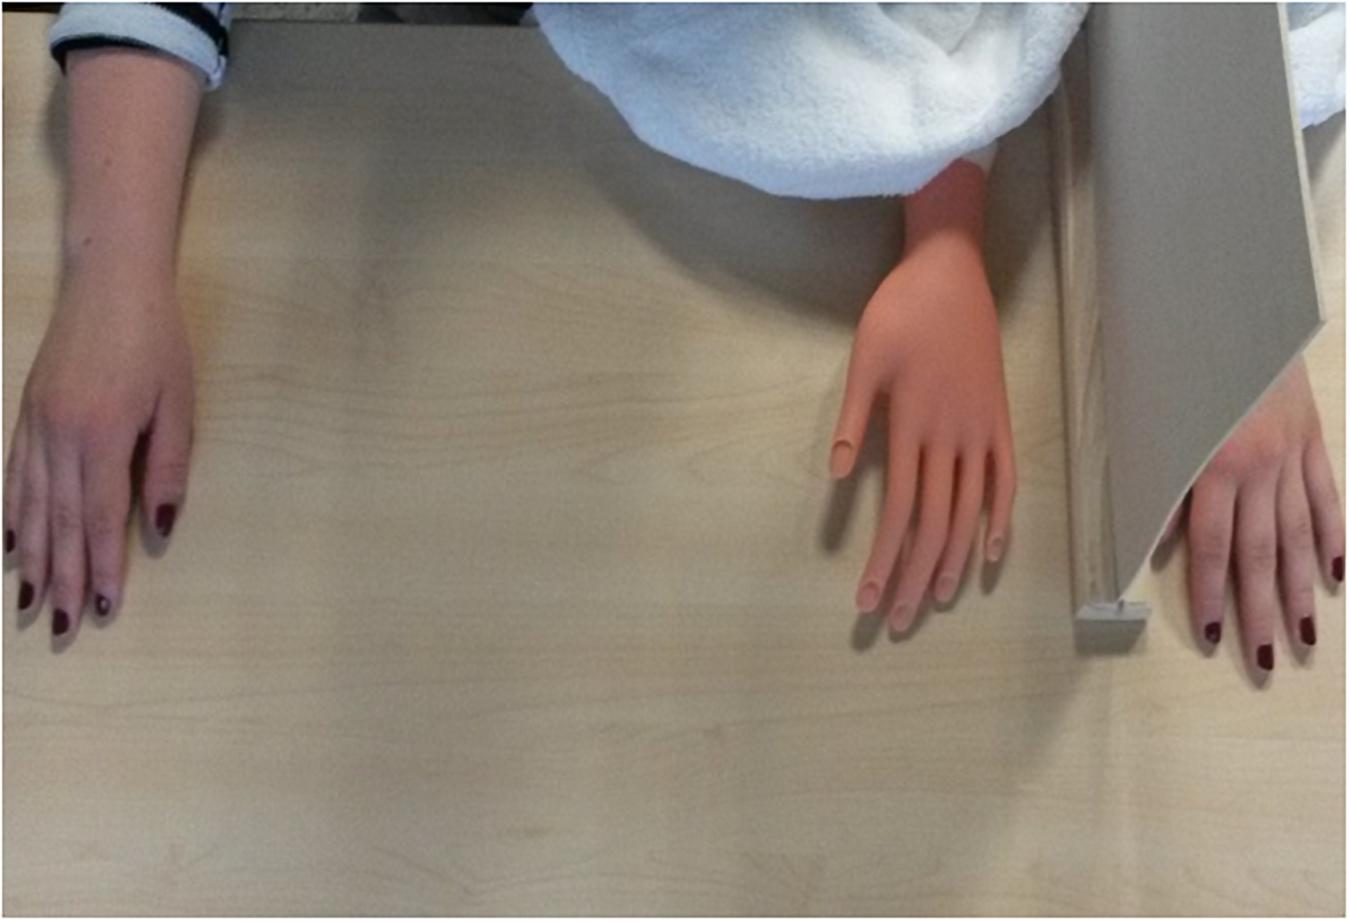 Frontiers  Verbal Suggestion Modulates the Sense of Ownership and Heat  Pain Threshold During the “Injured” Rubber Hand Illusion